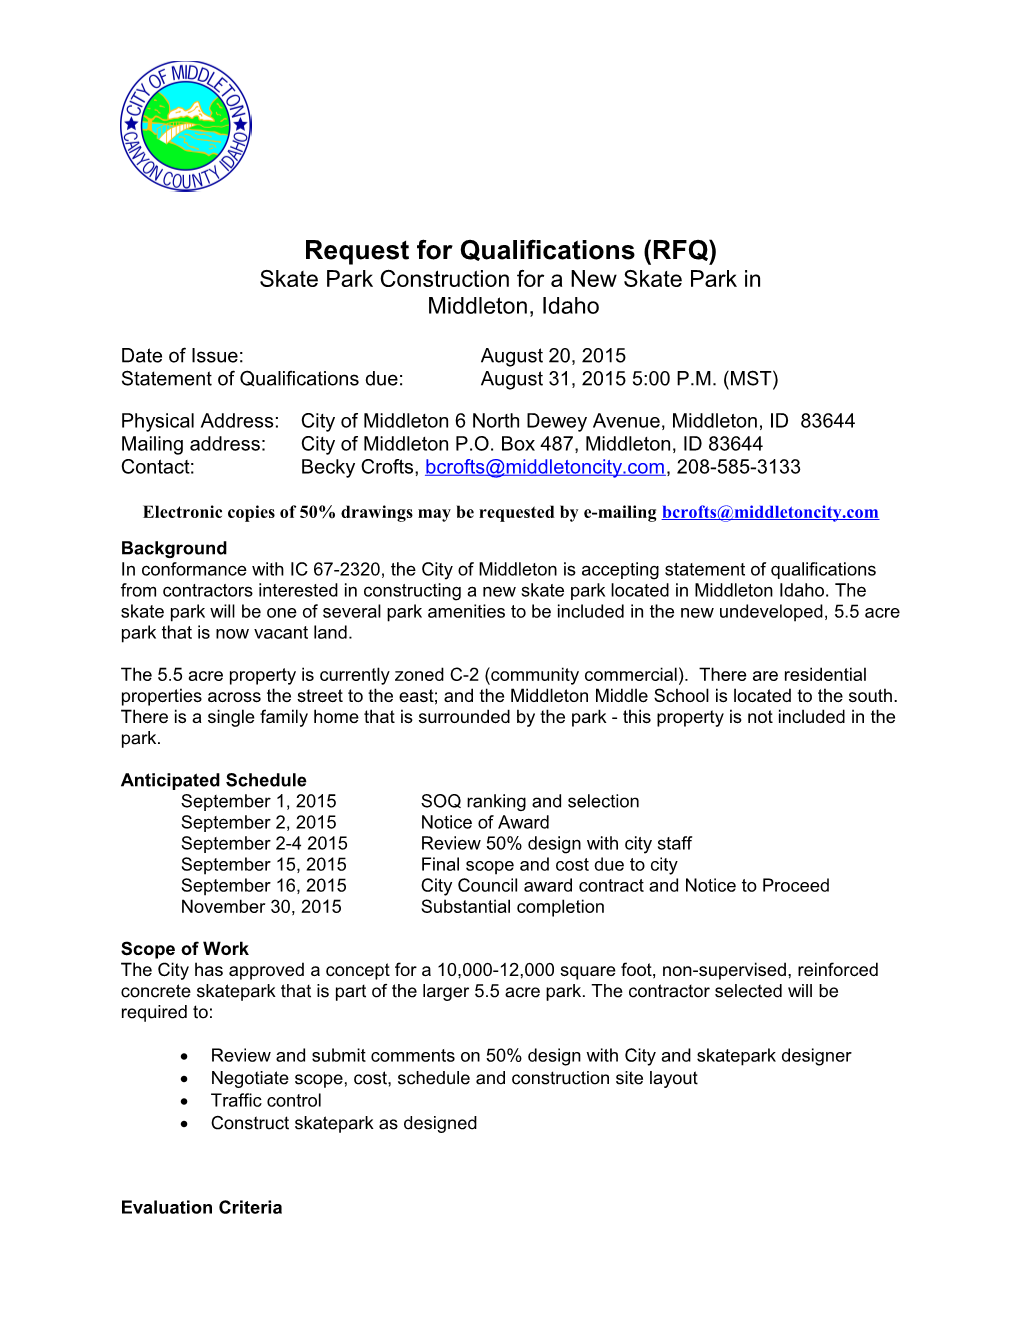 Request for Qualifications (RFQ) s1